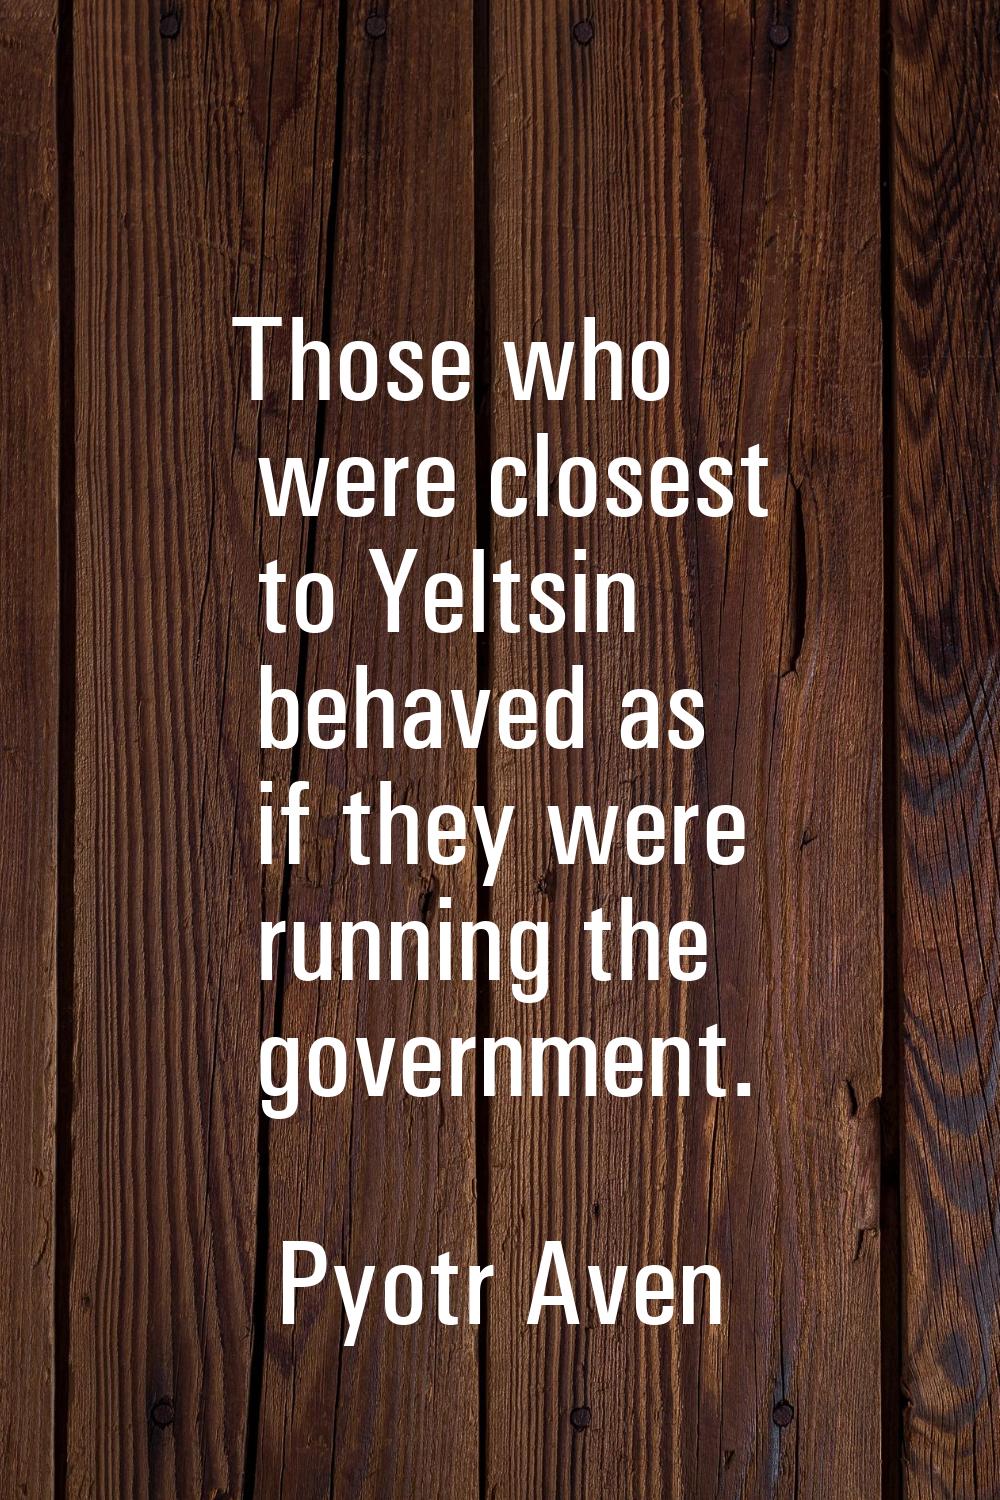 Those who were closest to Yeltsin behaved as if they were running the government.